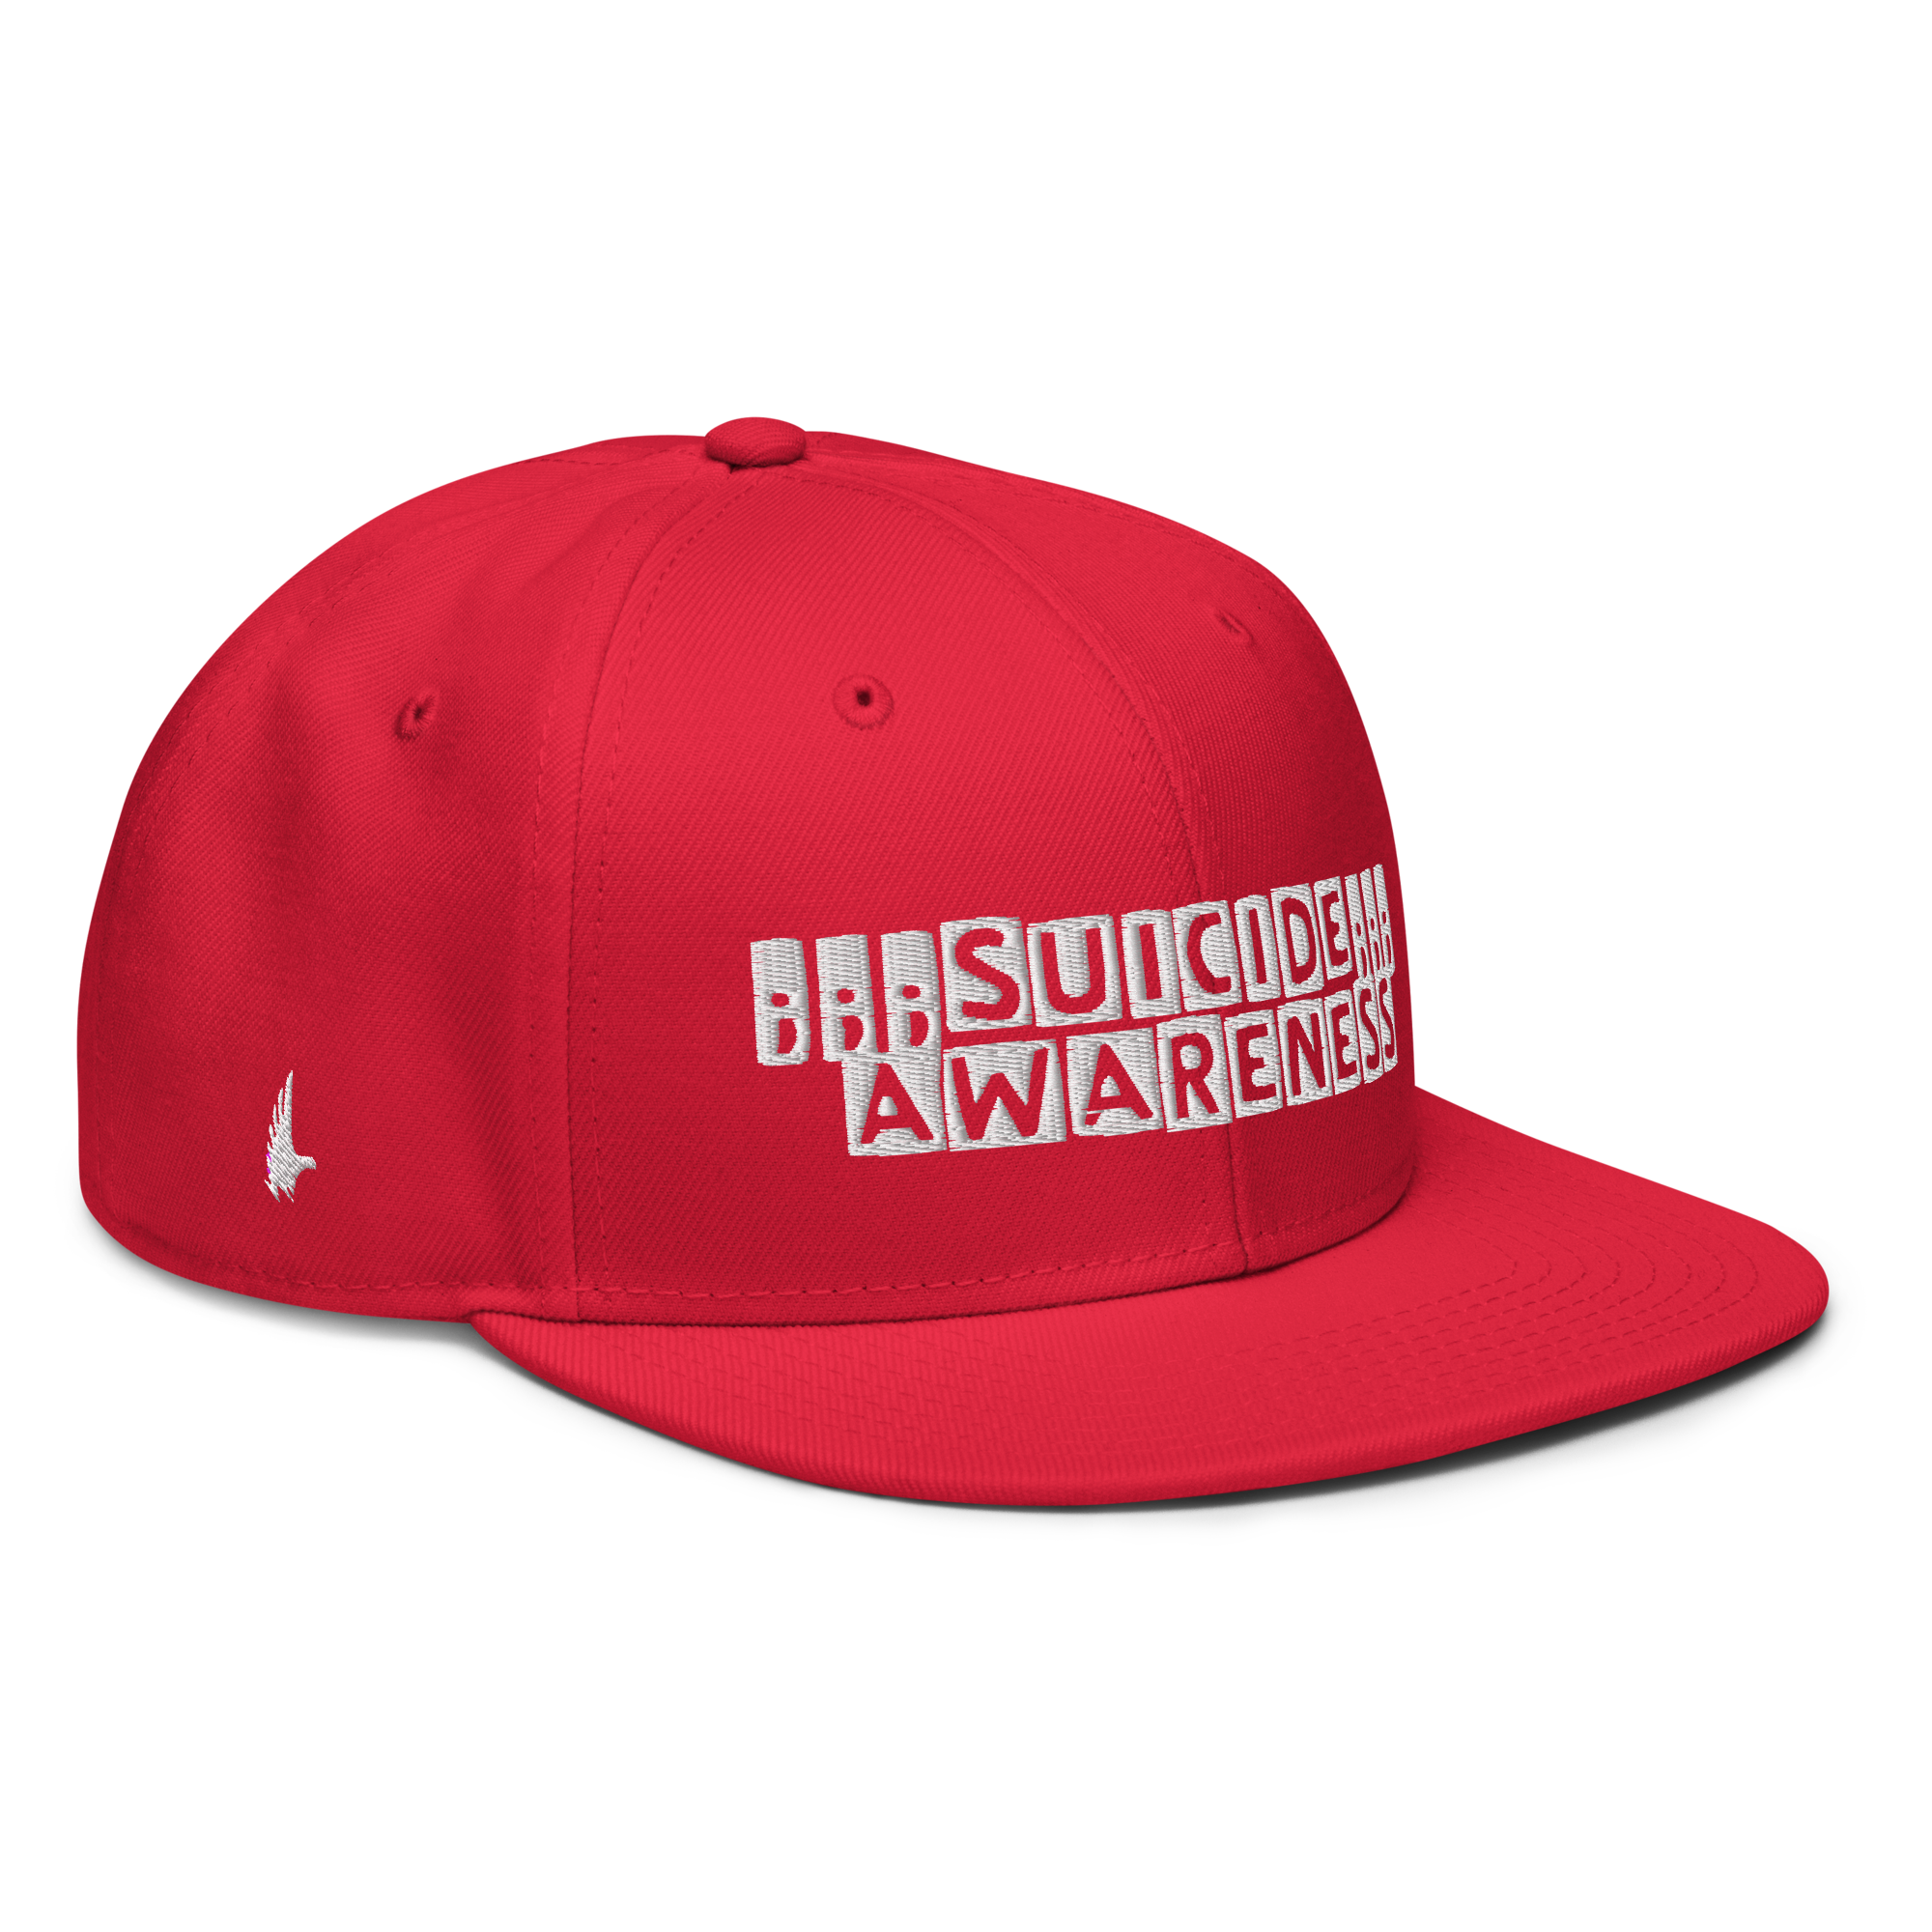 Suicide Awareness Snapback Hat - Red OS - Loyalty Vibes